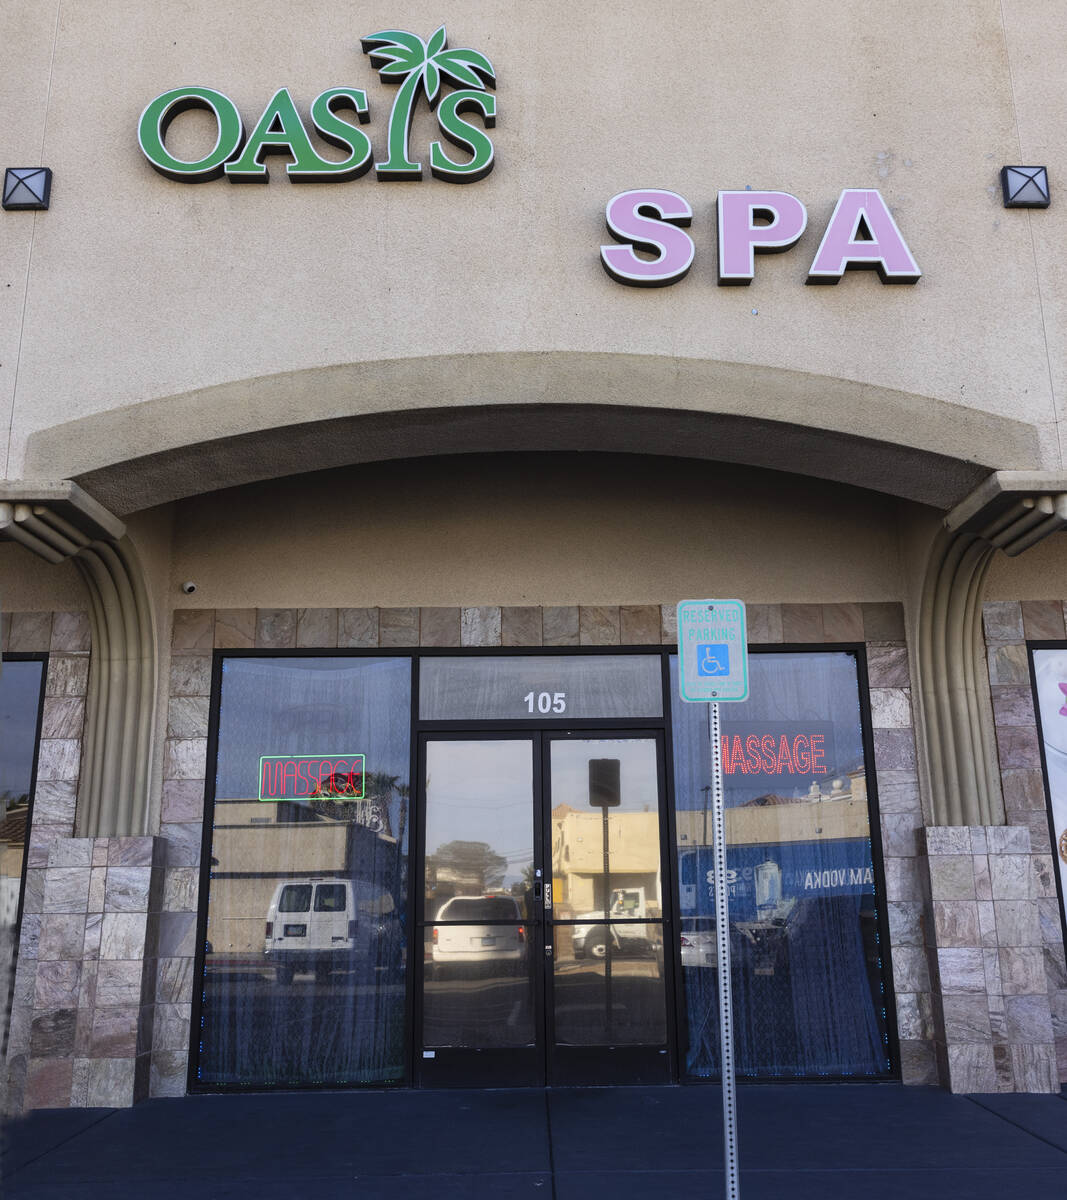 OASIS SPA at 4780 W. Tropicana Ave., is shown, on Friday, Feb. 3, 2023, in Las Vegas. Las Vegas ...